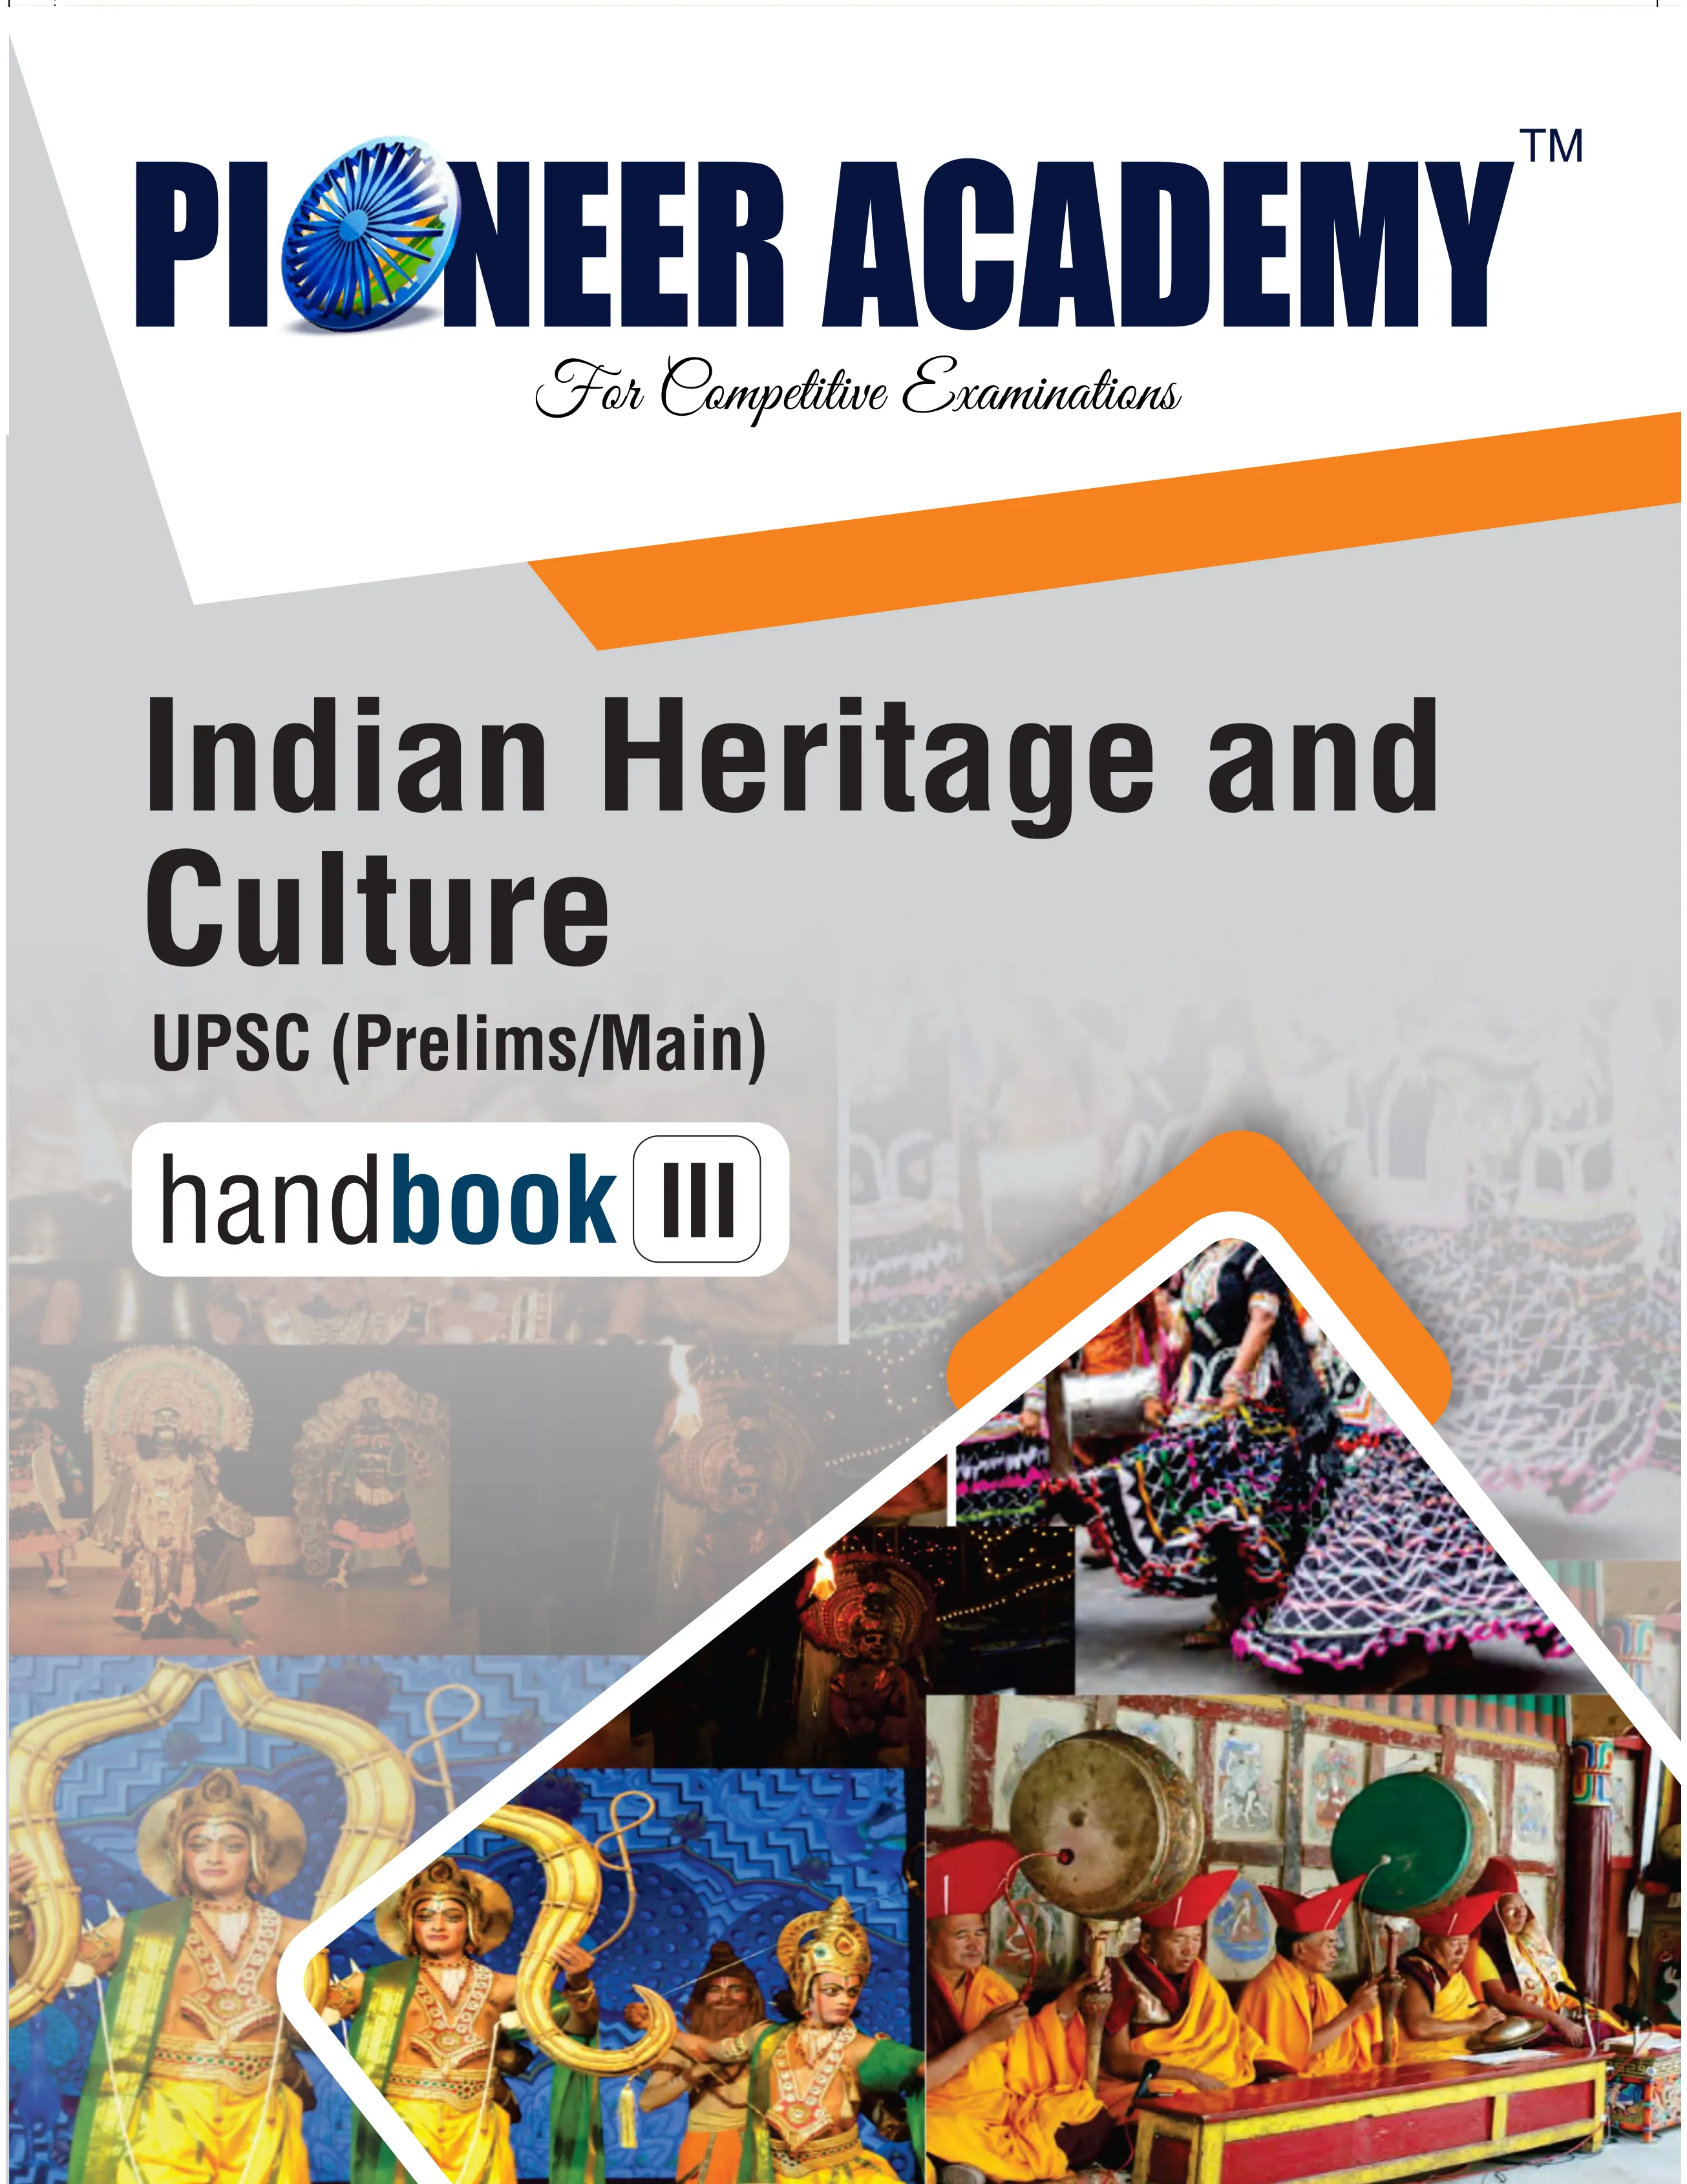 Indian Heritage and Culture - UPSC (Prelims/Main)